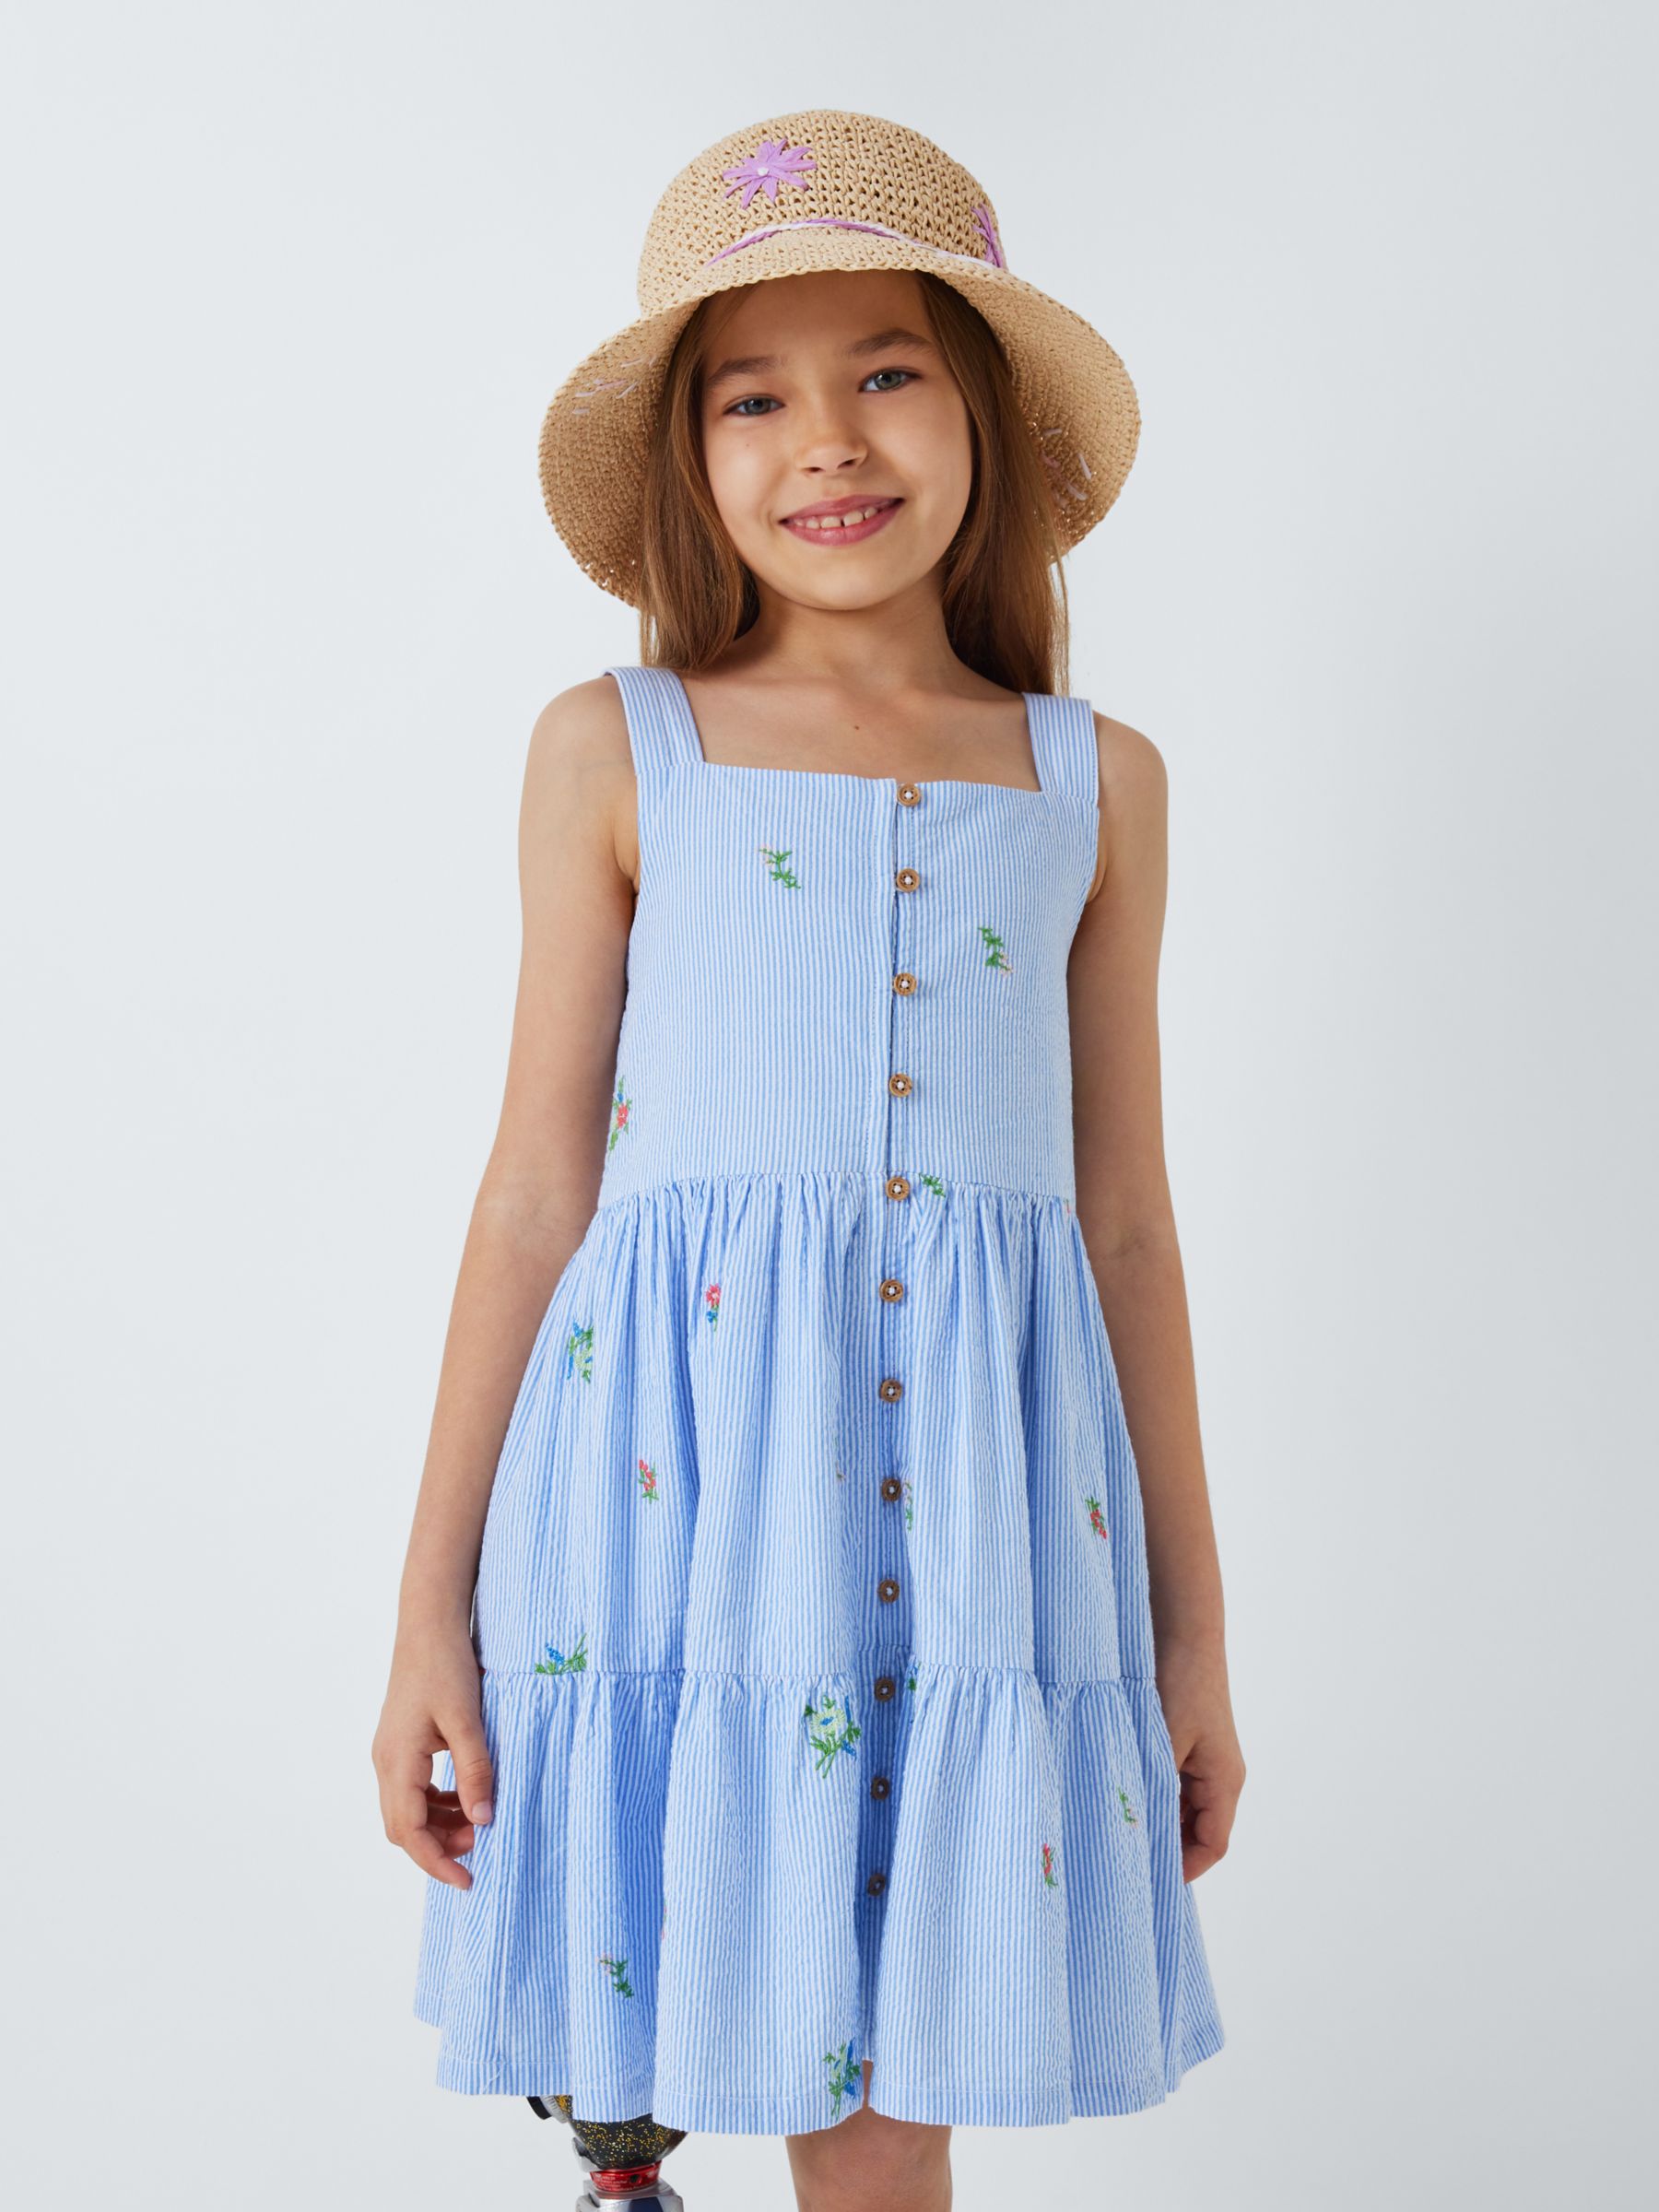 John Lewis Kids' Pinstripe Embroided Tiered Dress, Blue/White, 4 years